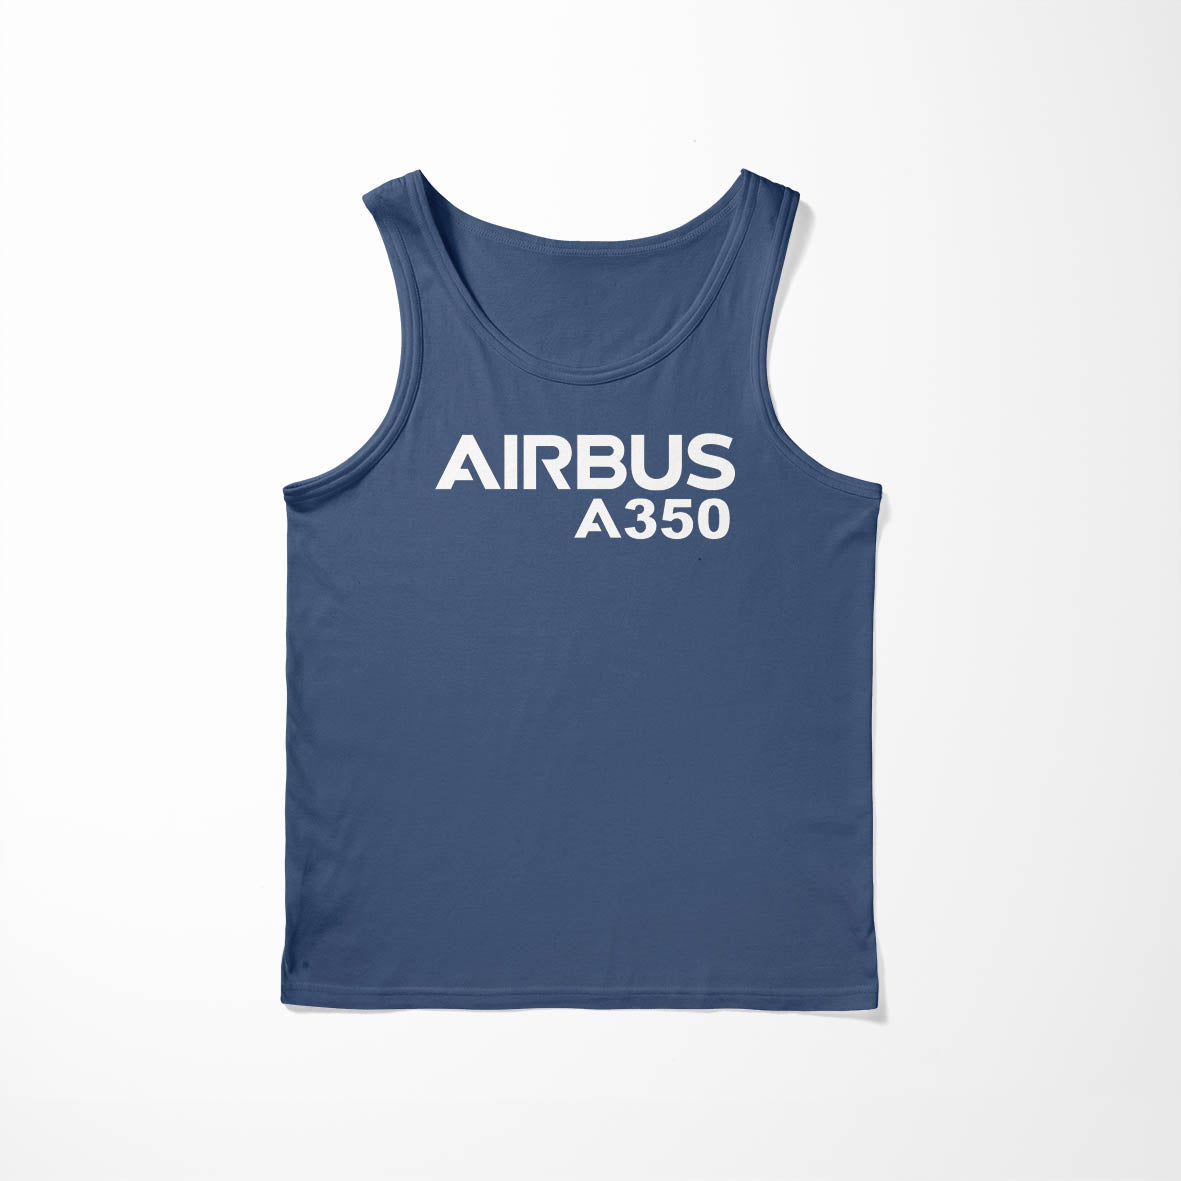 Airbus A350 & Text Designed Tank Tops